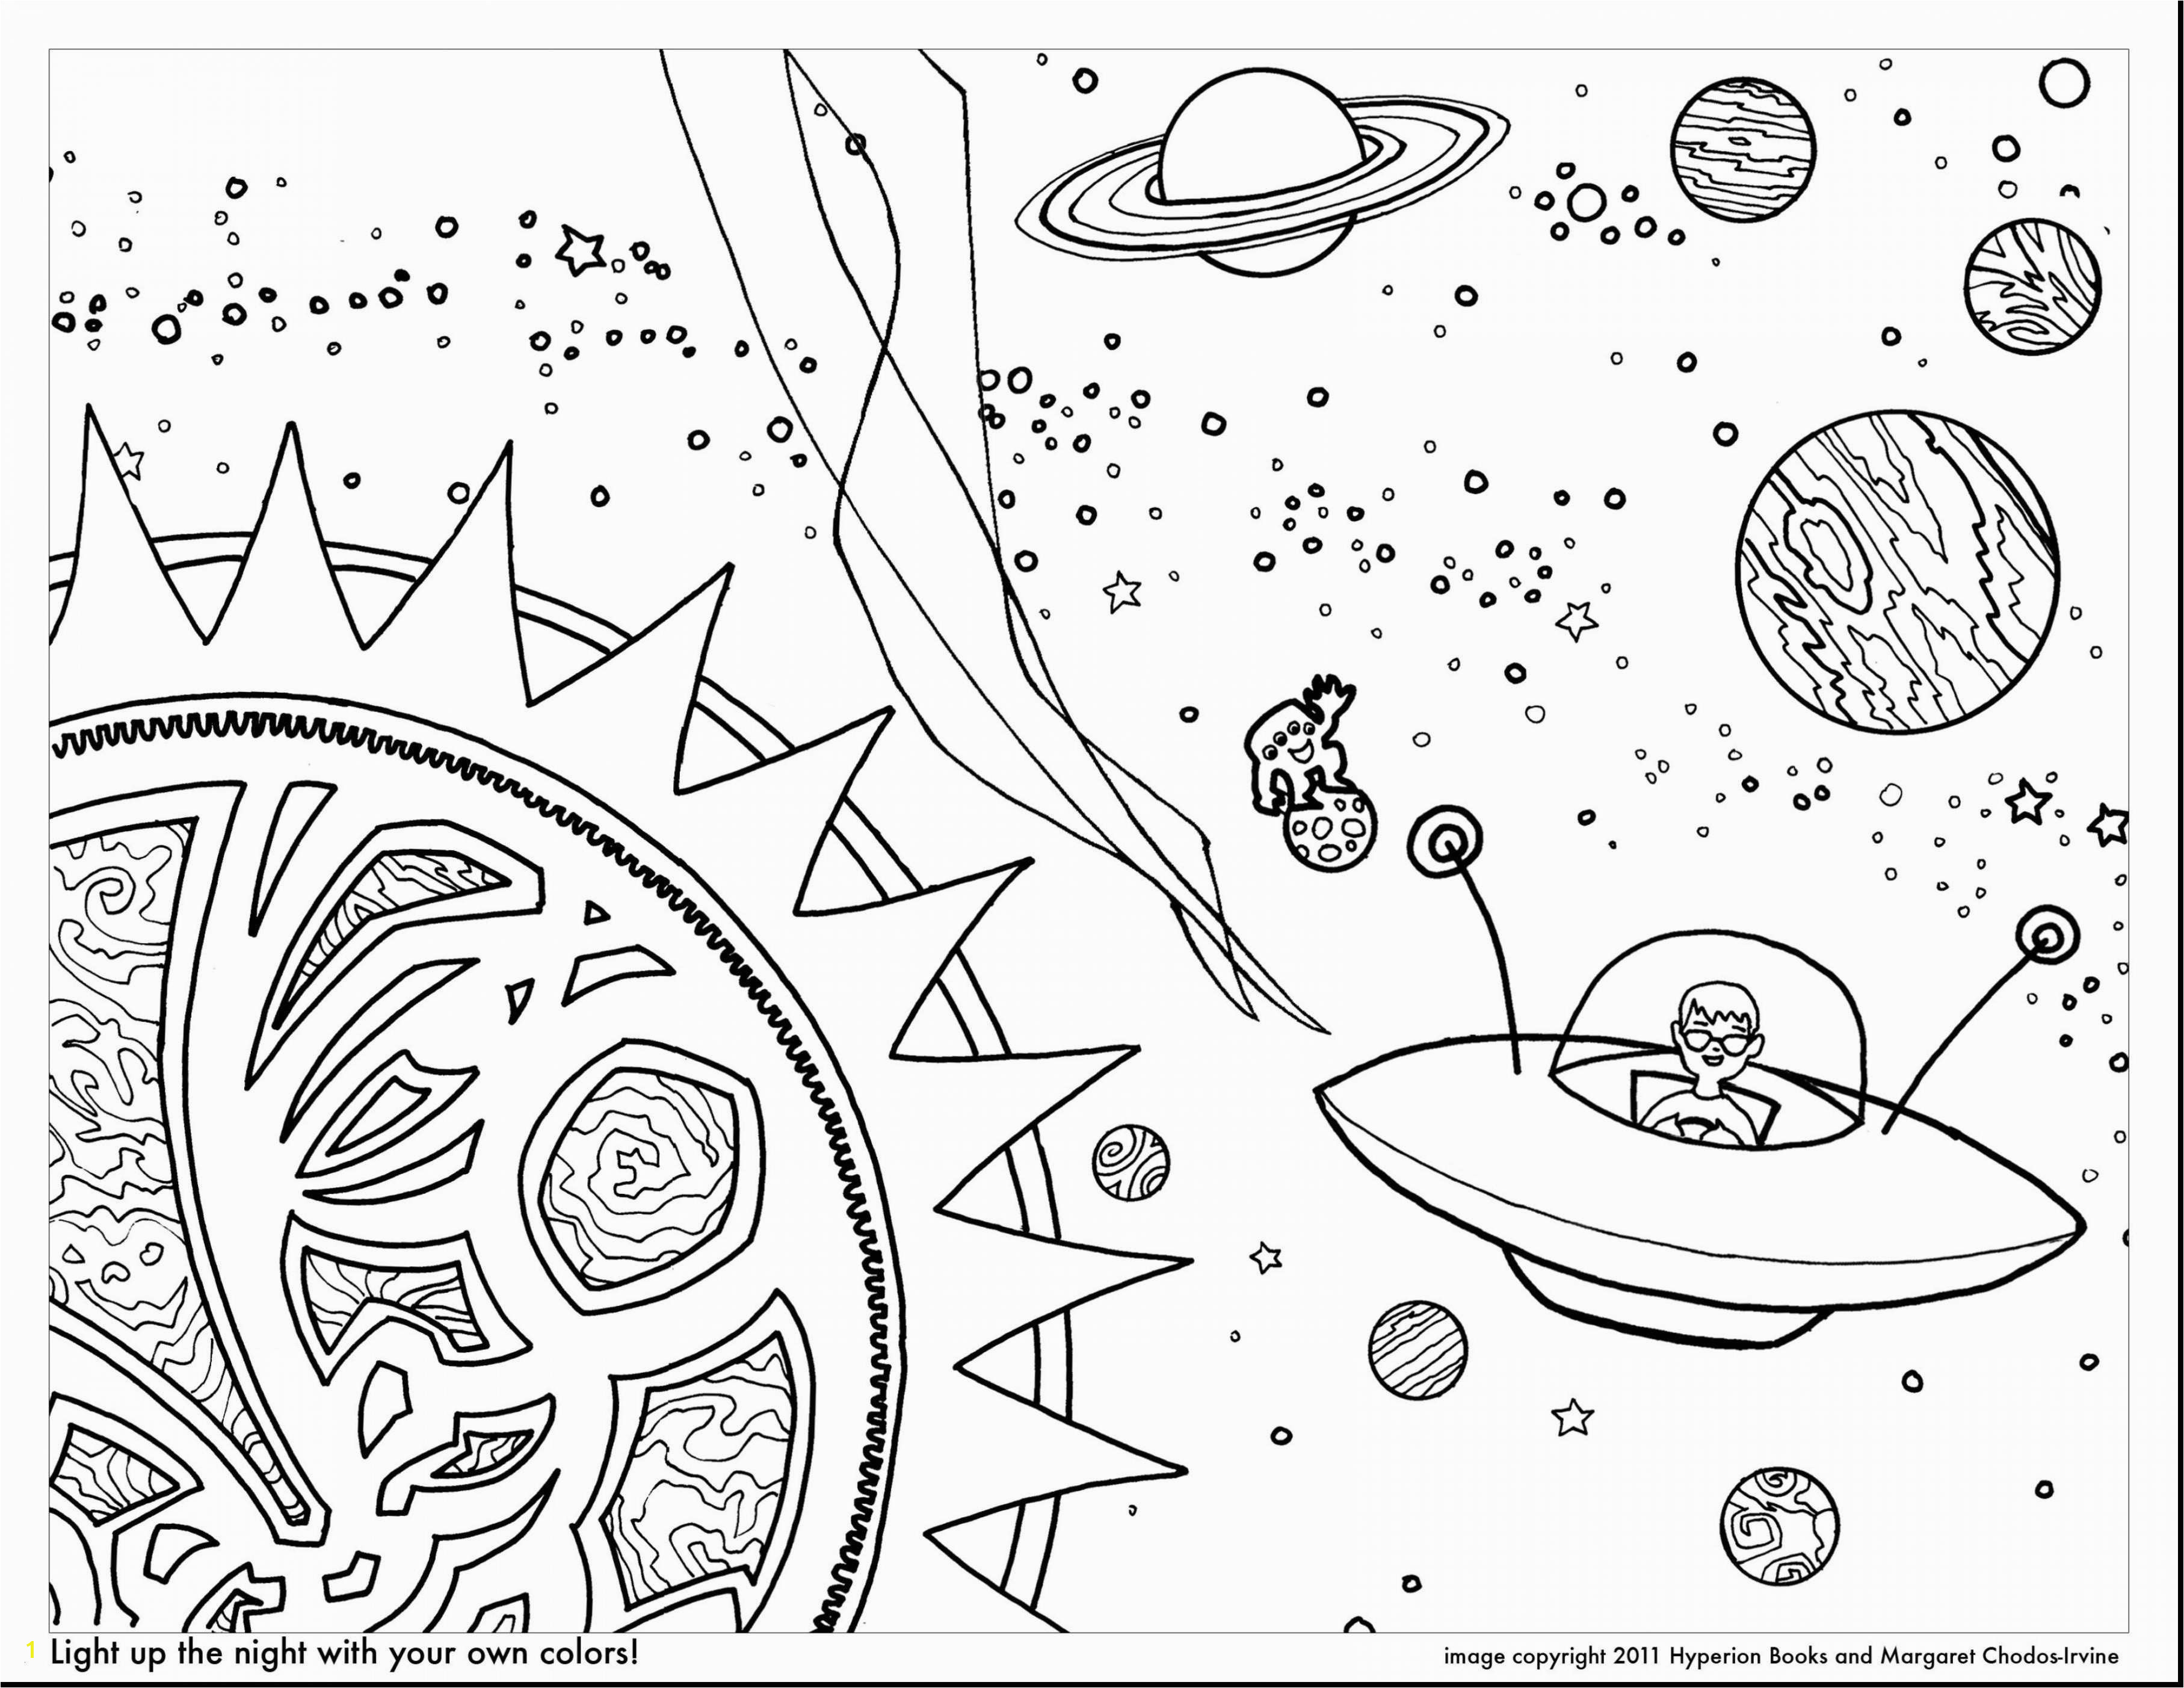 Solar System Coloring Pages Awesome Coloring Pages solar System Coloring Pages Coloring Pages Solar System